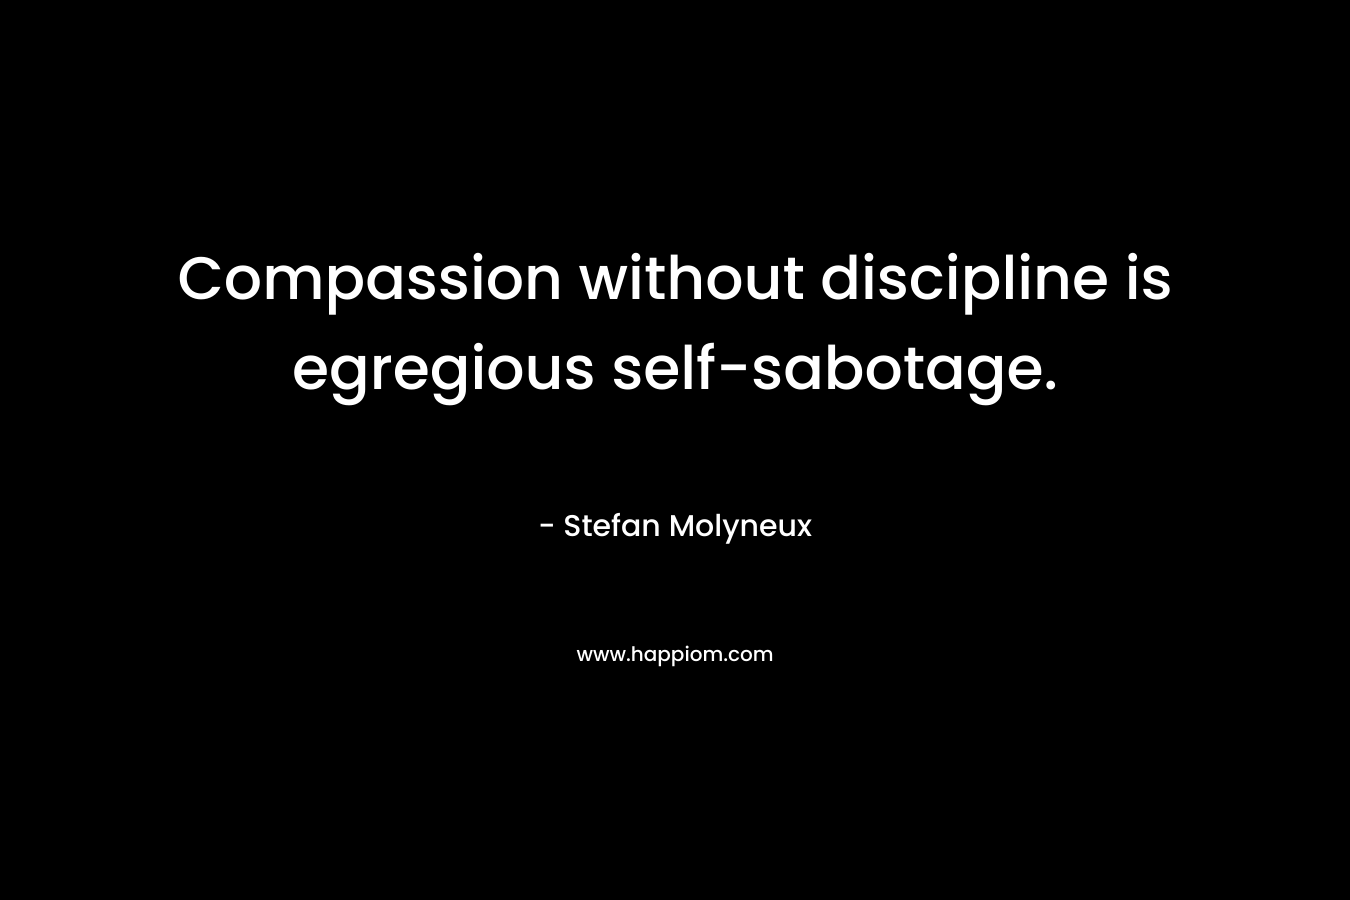 Compassion without discipline is egregious self-sabotage.